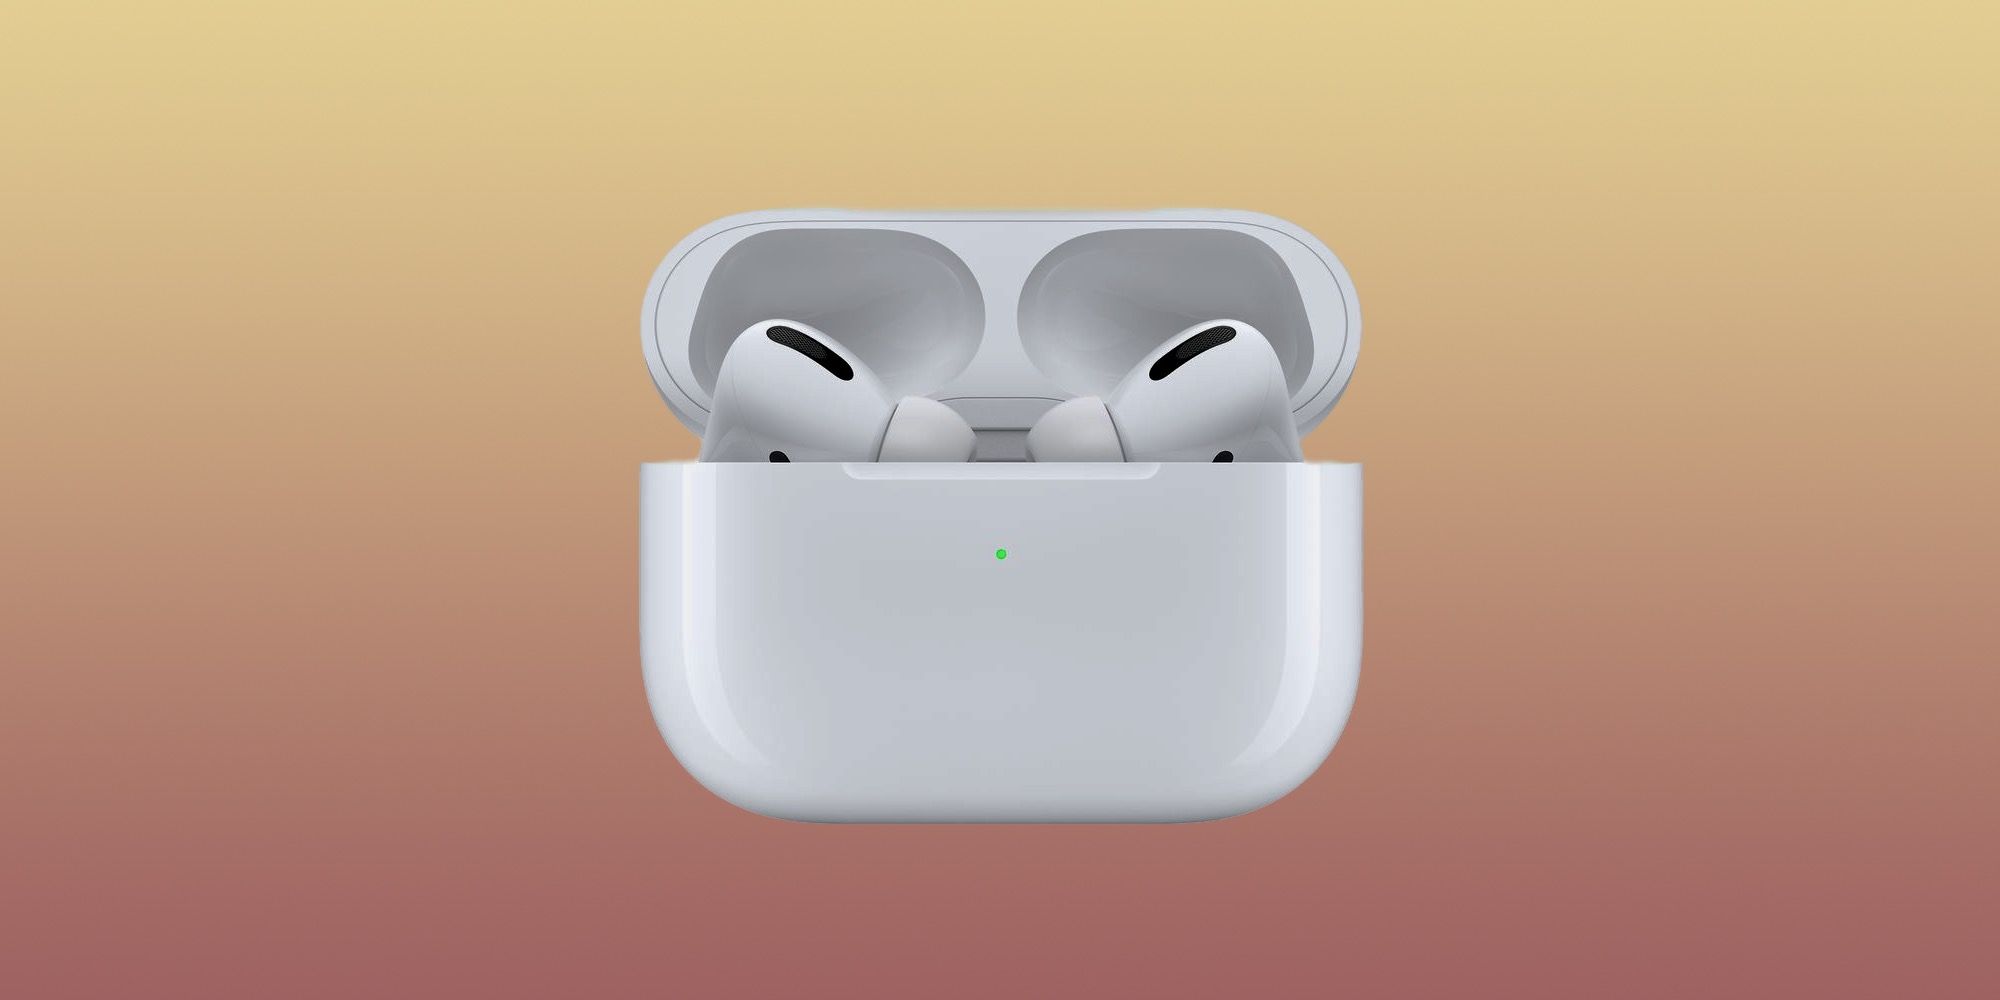 Apples NextGen AirPods Pro Buds To Debut In 2022 Insider Claims